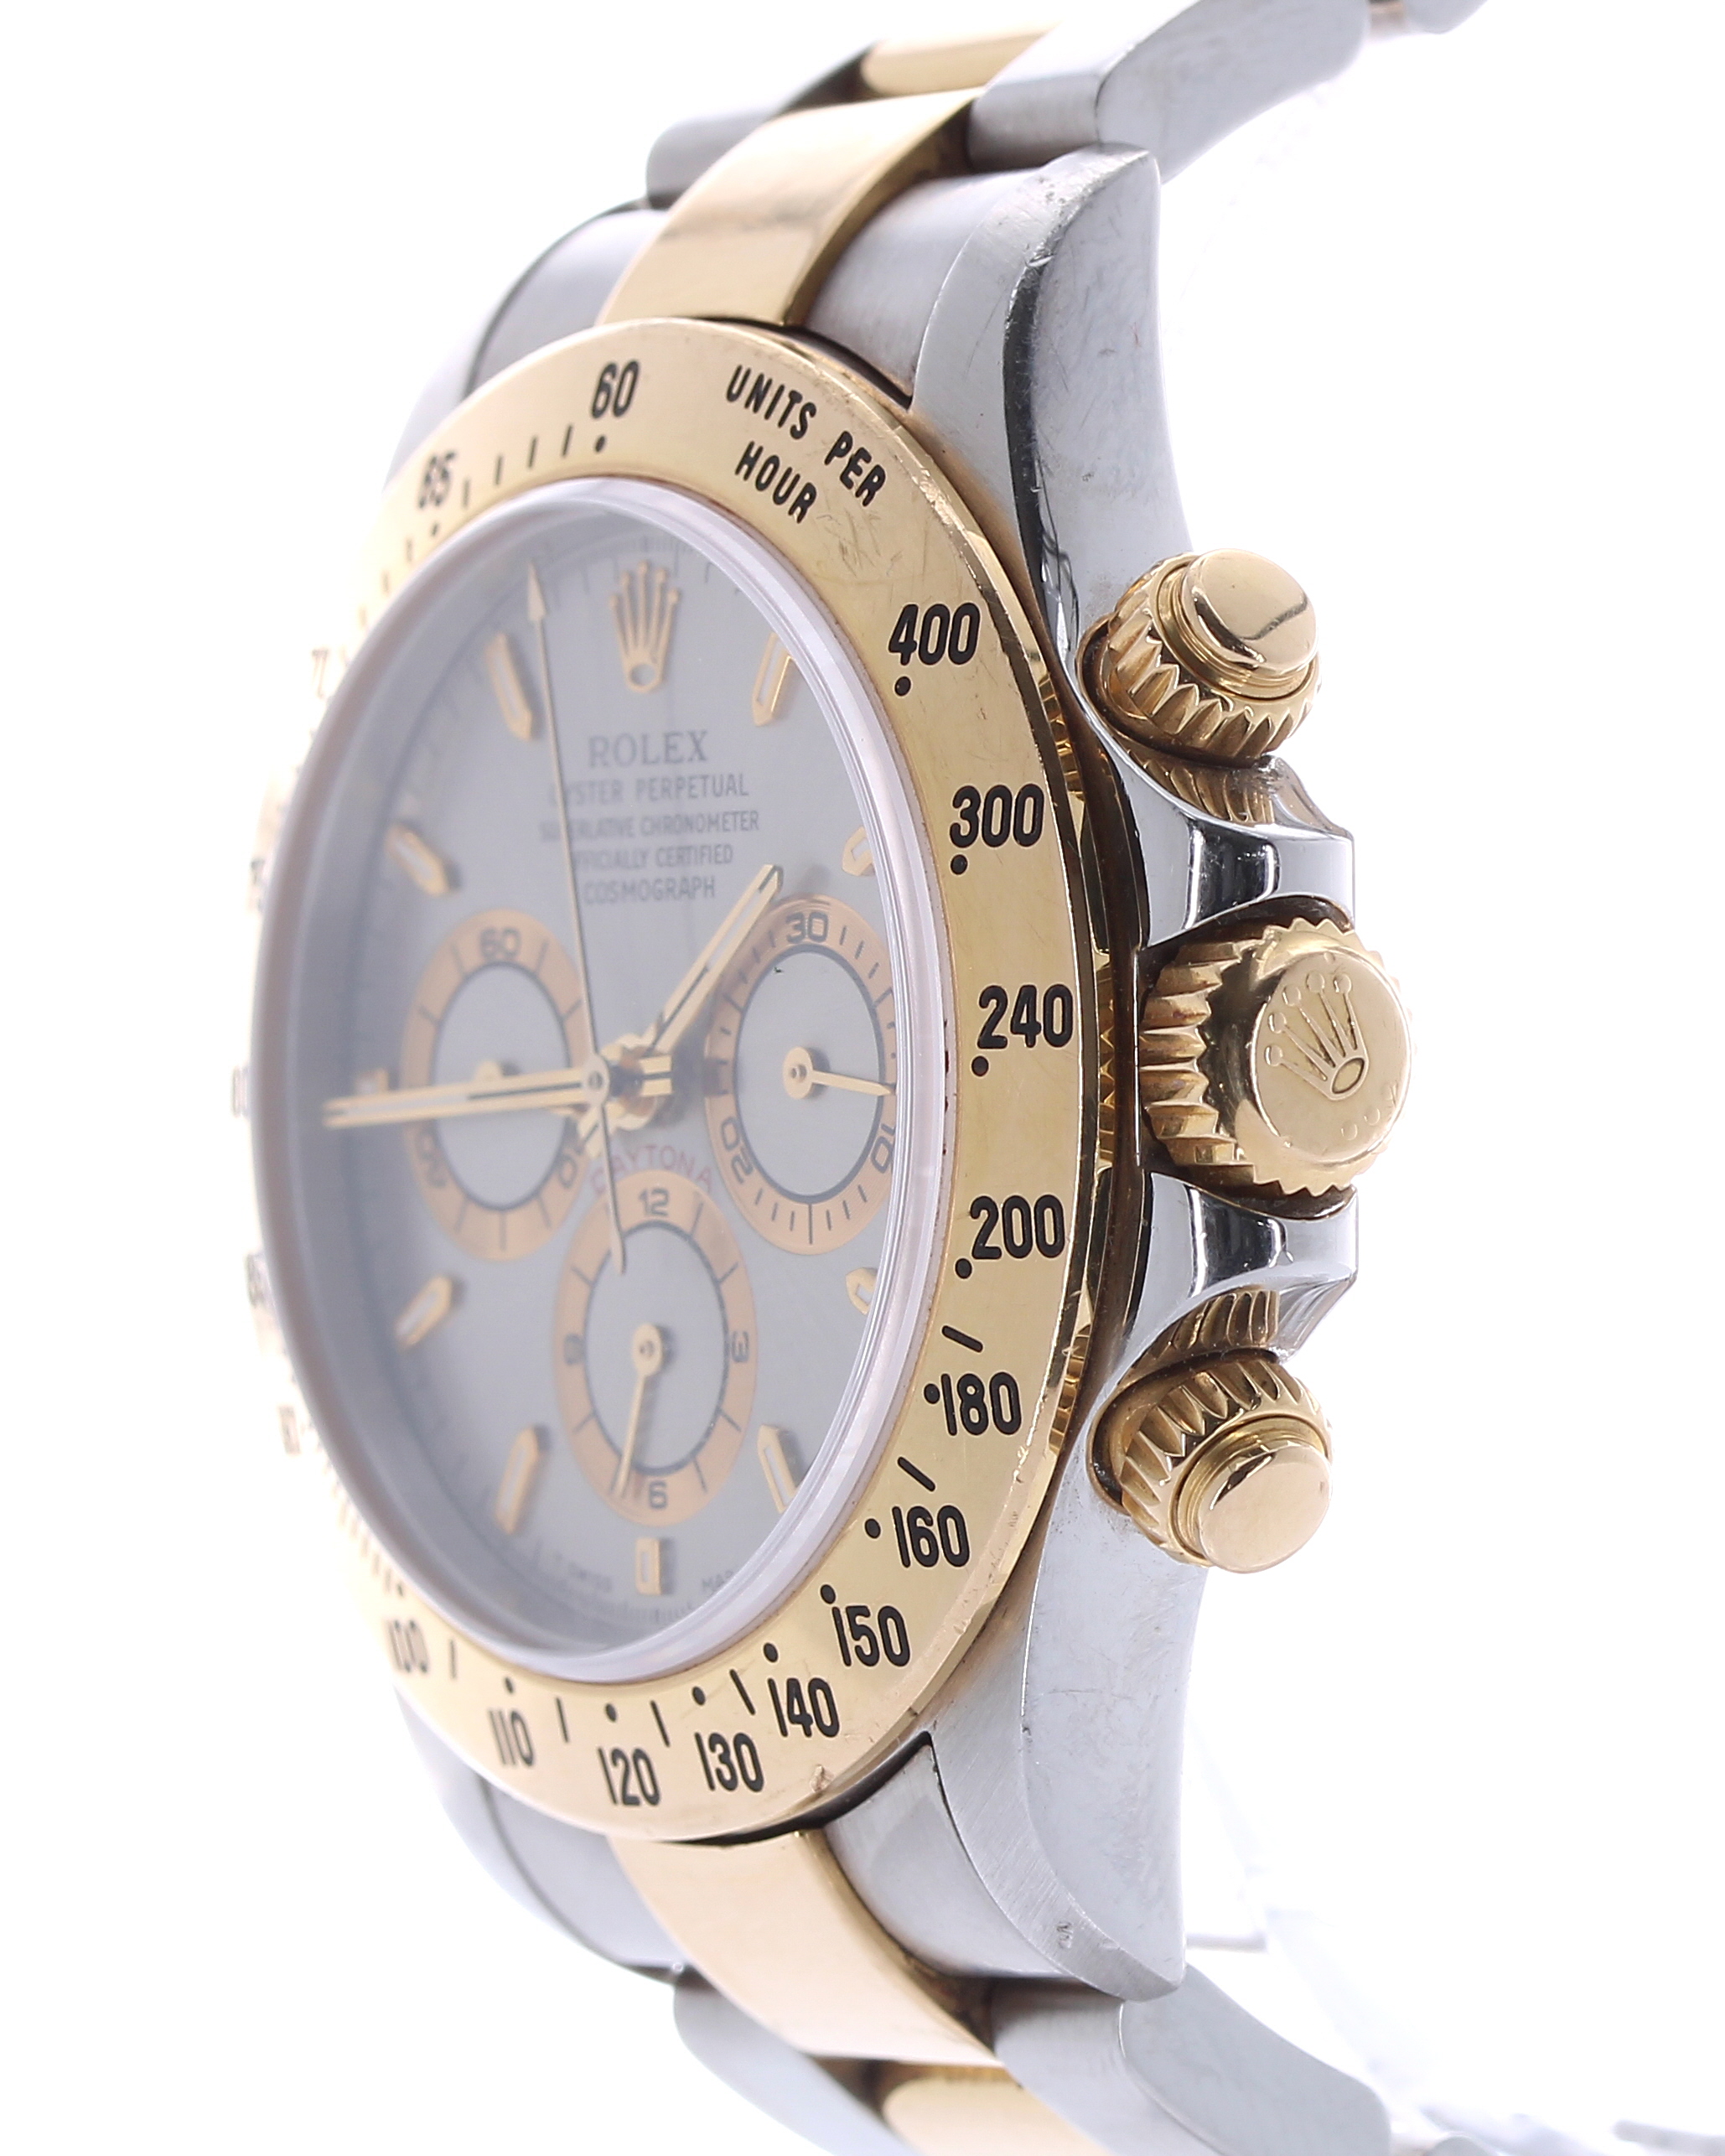 Fine Rolex Oyster Perpetual Cosmograph Daytona gold and stainless steel gentleman's bracelet watch, - Image 3 of 6